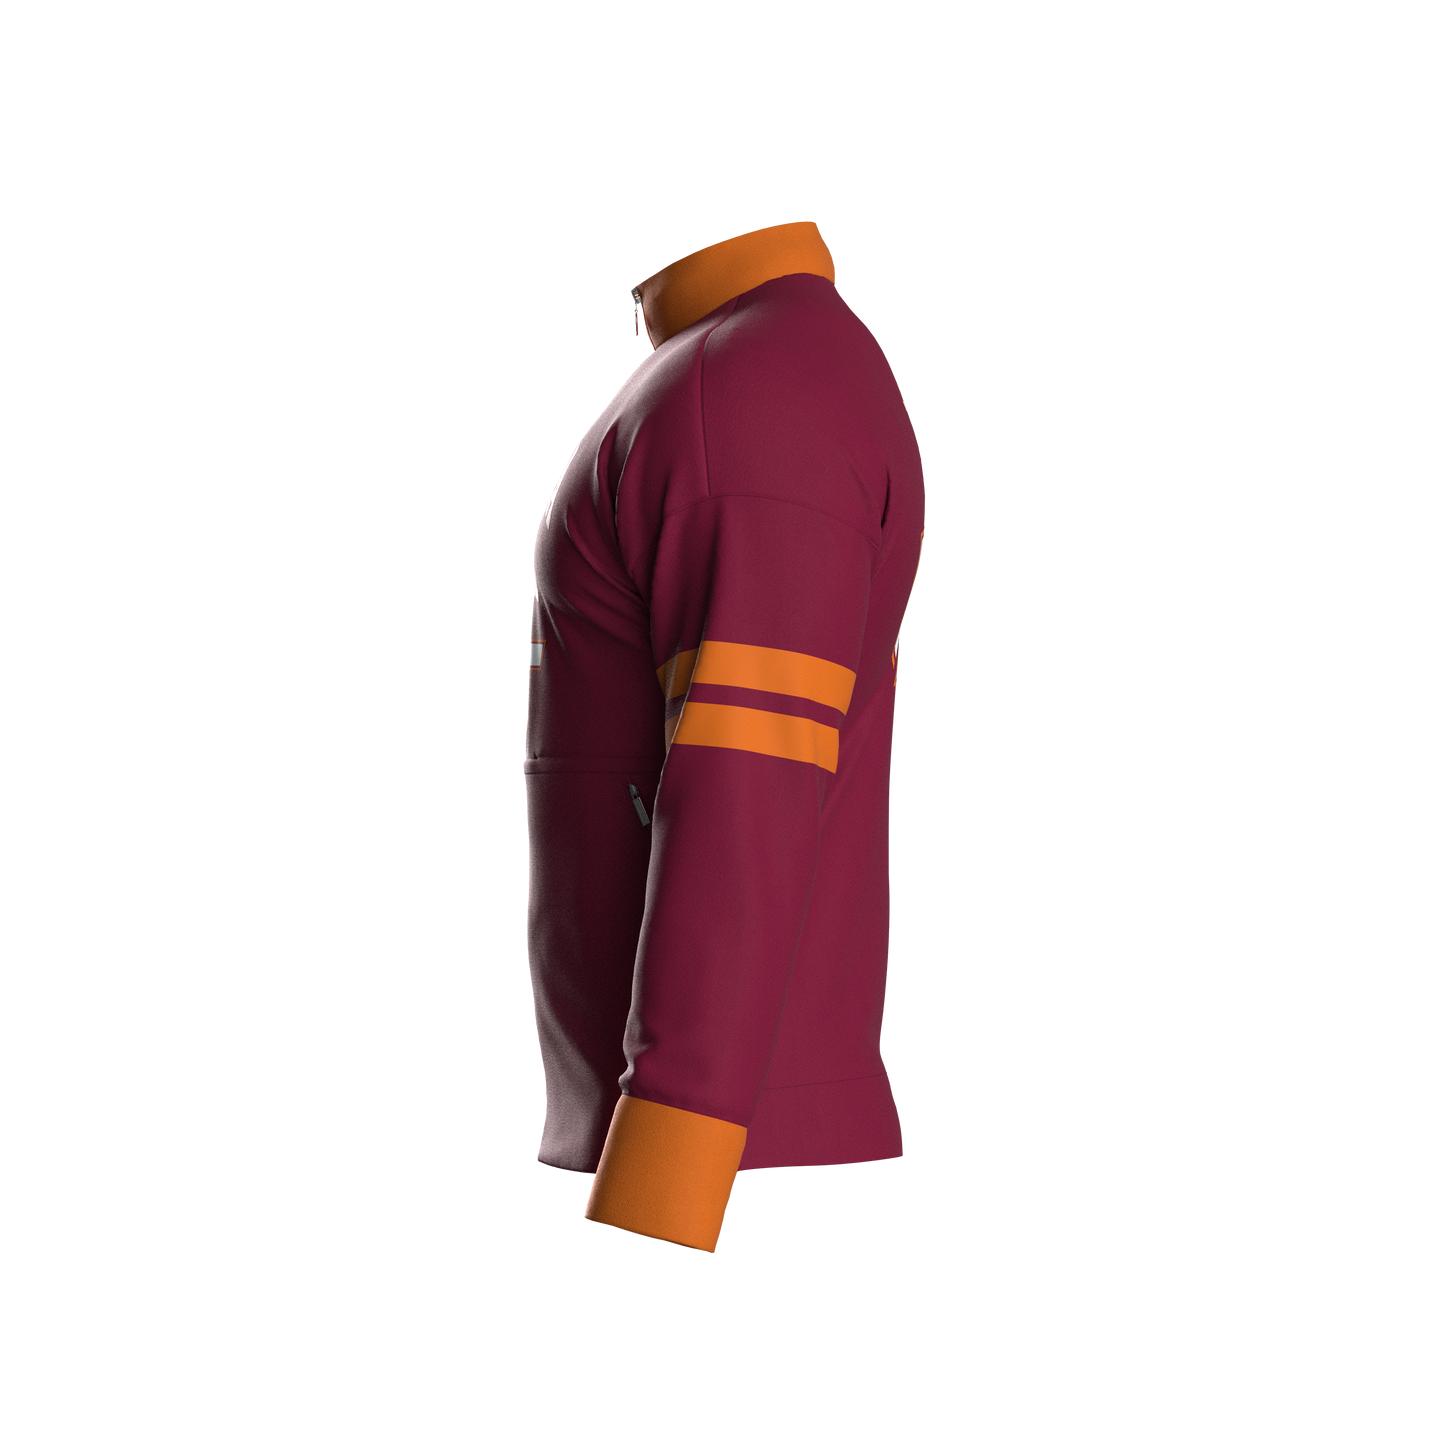 Virginia Tech State University Home Zip-Up (youth)